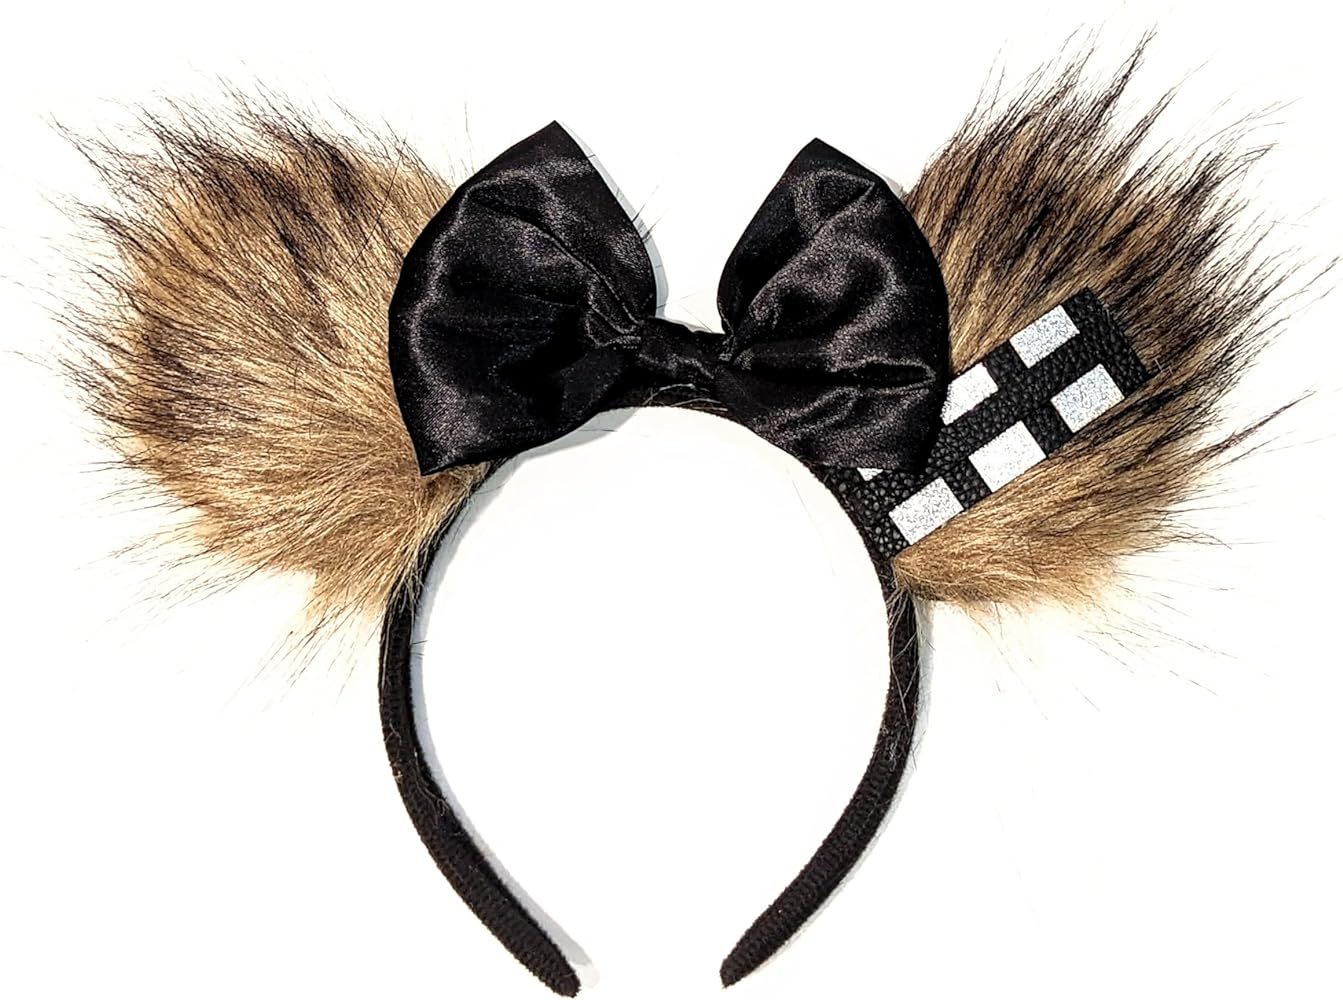 CLGIFT Star Wars Ears, Black Mouse Ears, Darth Vader, Mickey Mouse Ears | Amazon (US)